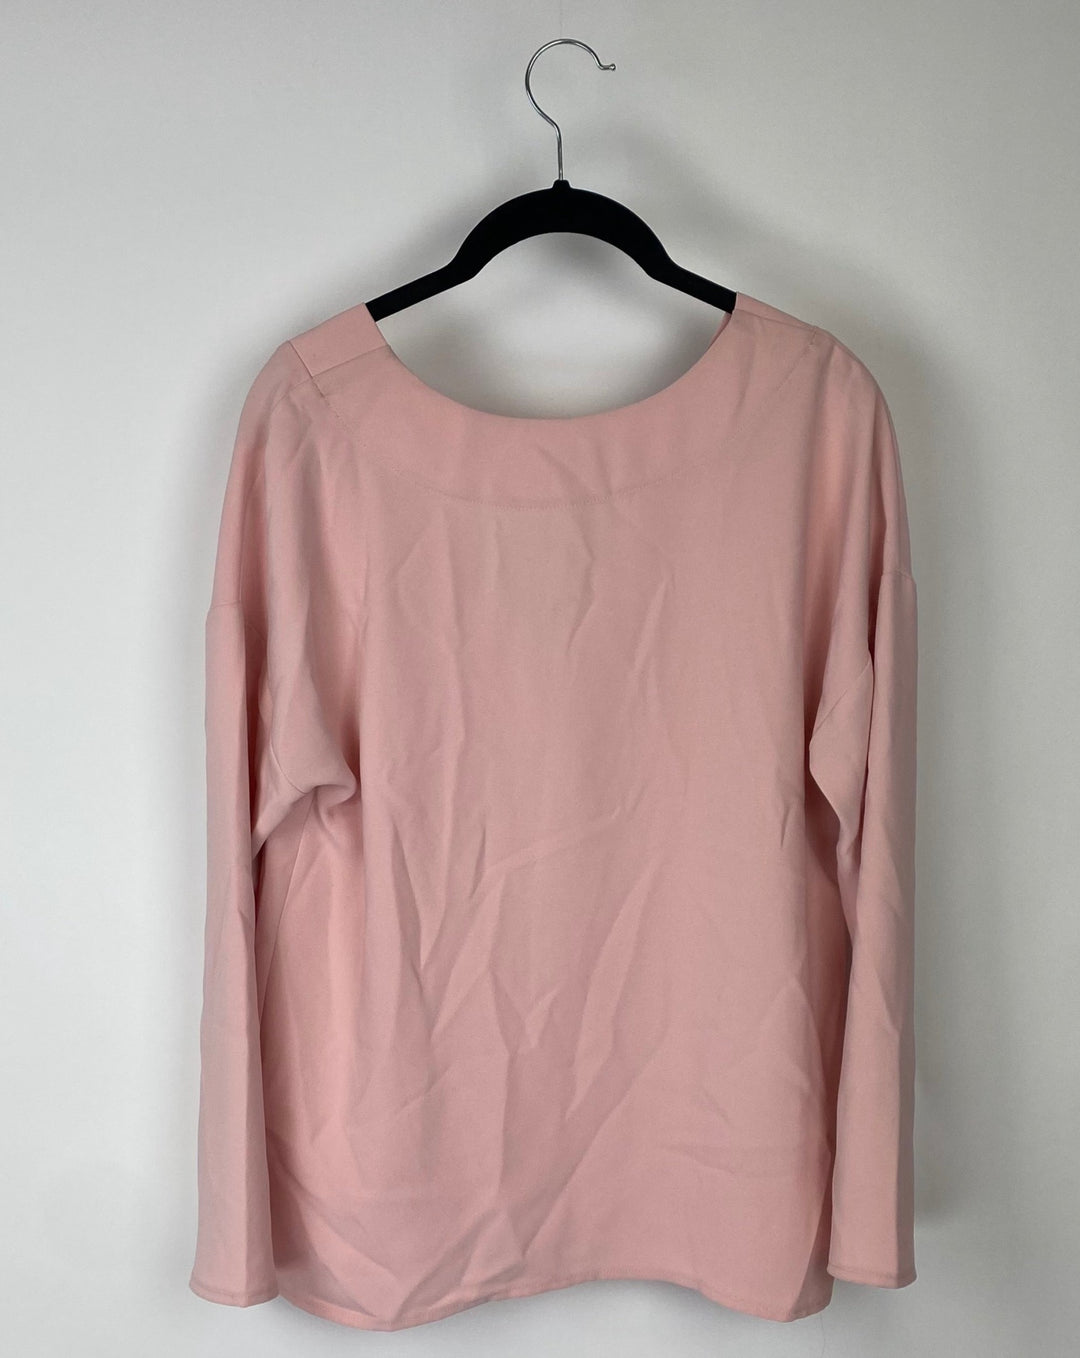 Pink Blouse - Small